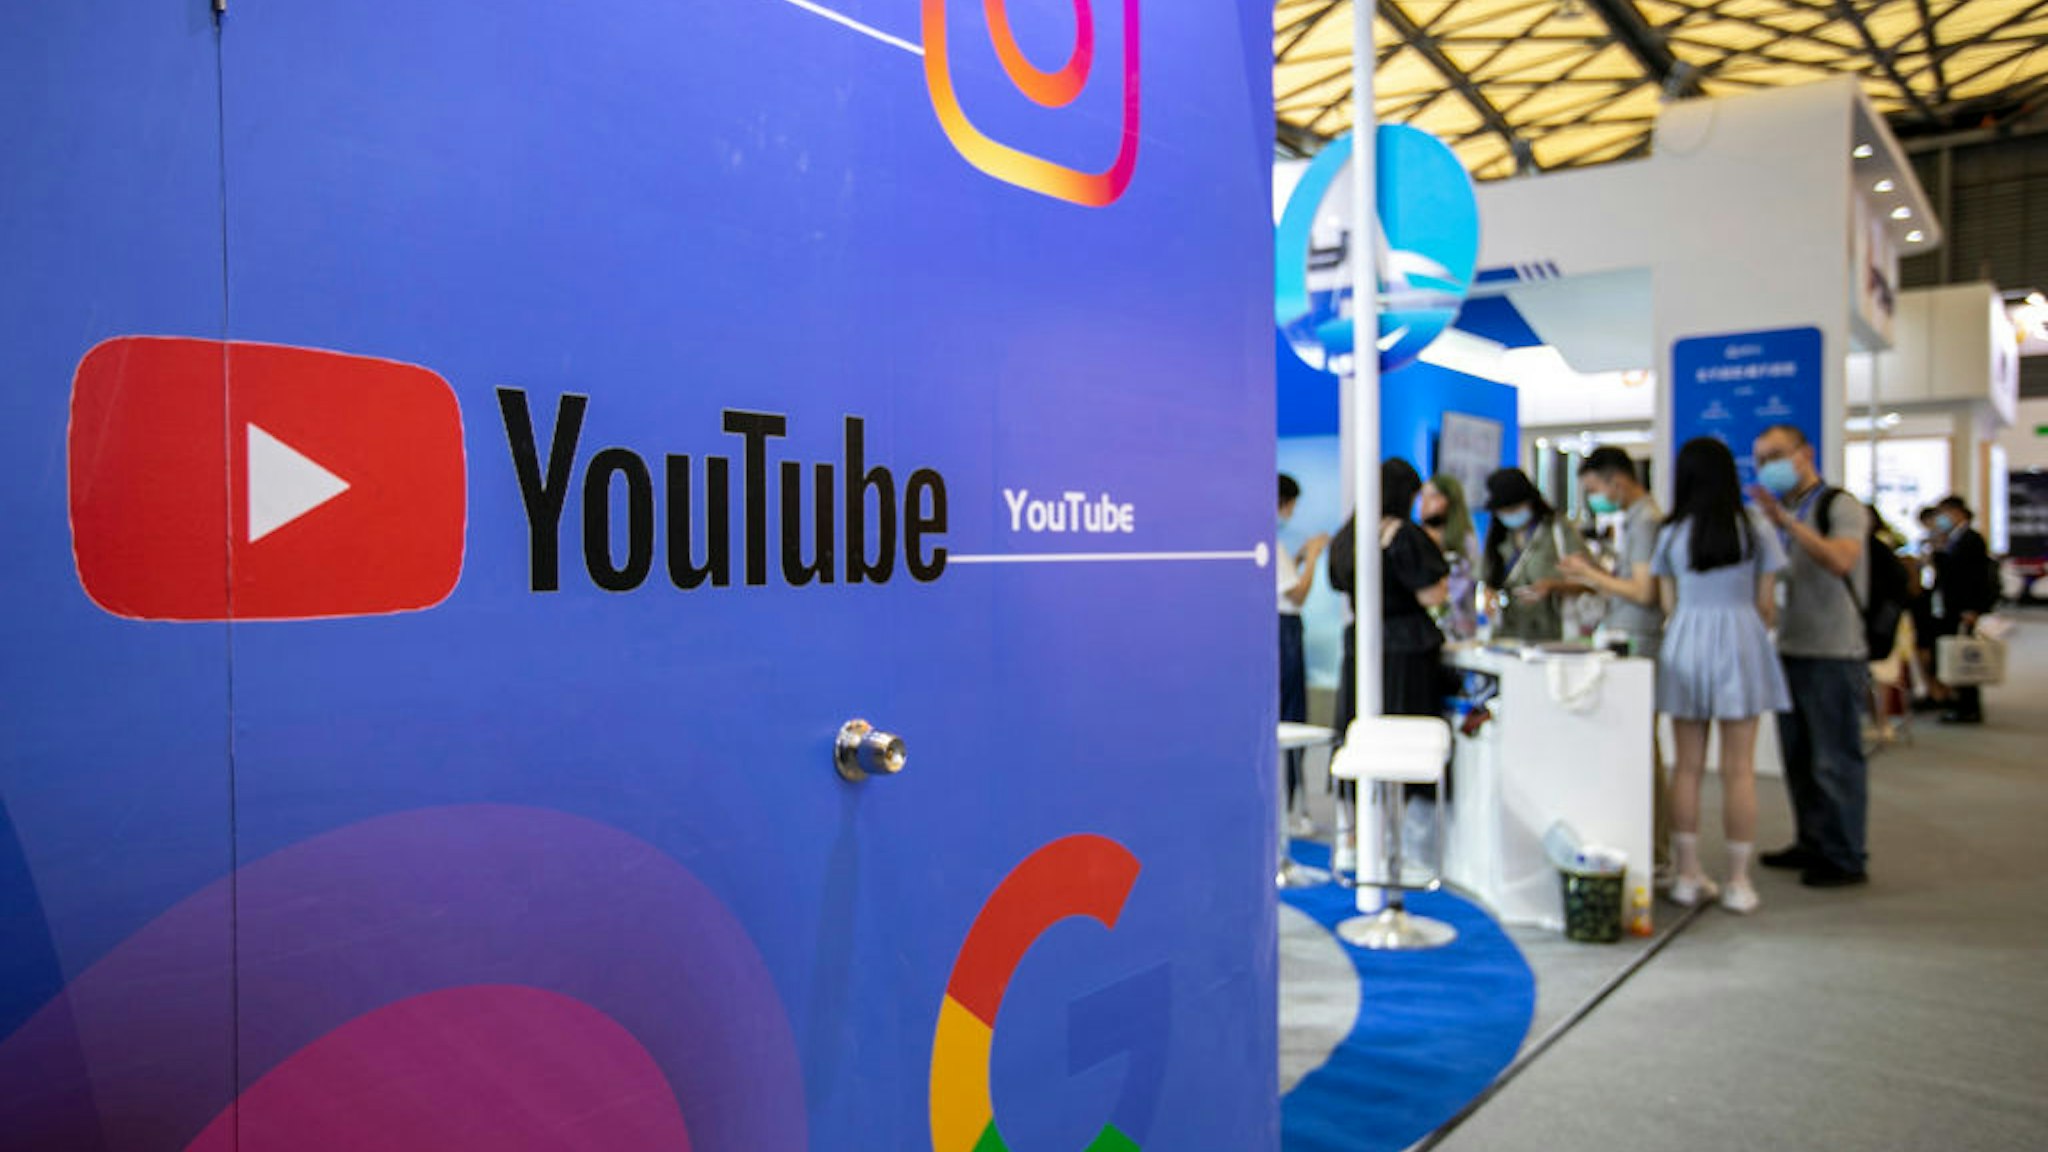 SHANGHAI, CHINA - JULY 31: A billboard advertisement for Youtube is seen during the 2020 China Digital Entertainment Expo &amp; Conference (ChinaJoy) at Shanghai New International Expo Center on July 31, 2020 in Shanghai, China. (Photo by VCG/VCG via Getty Images)